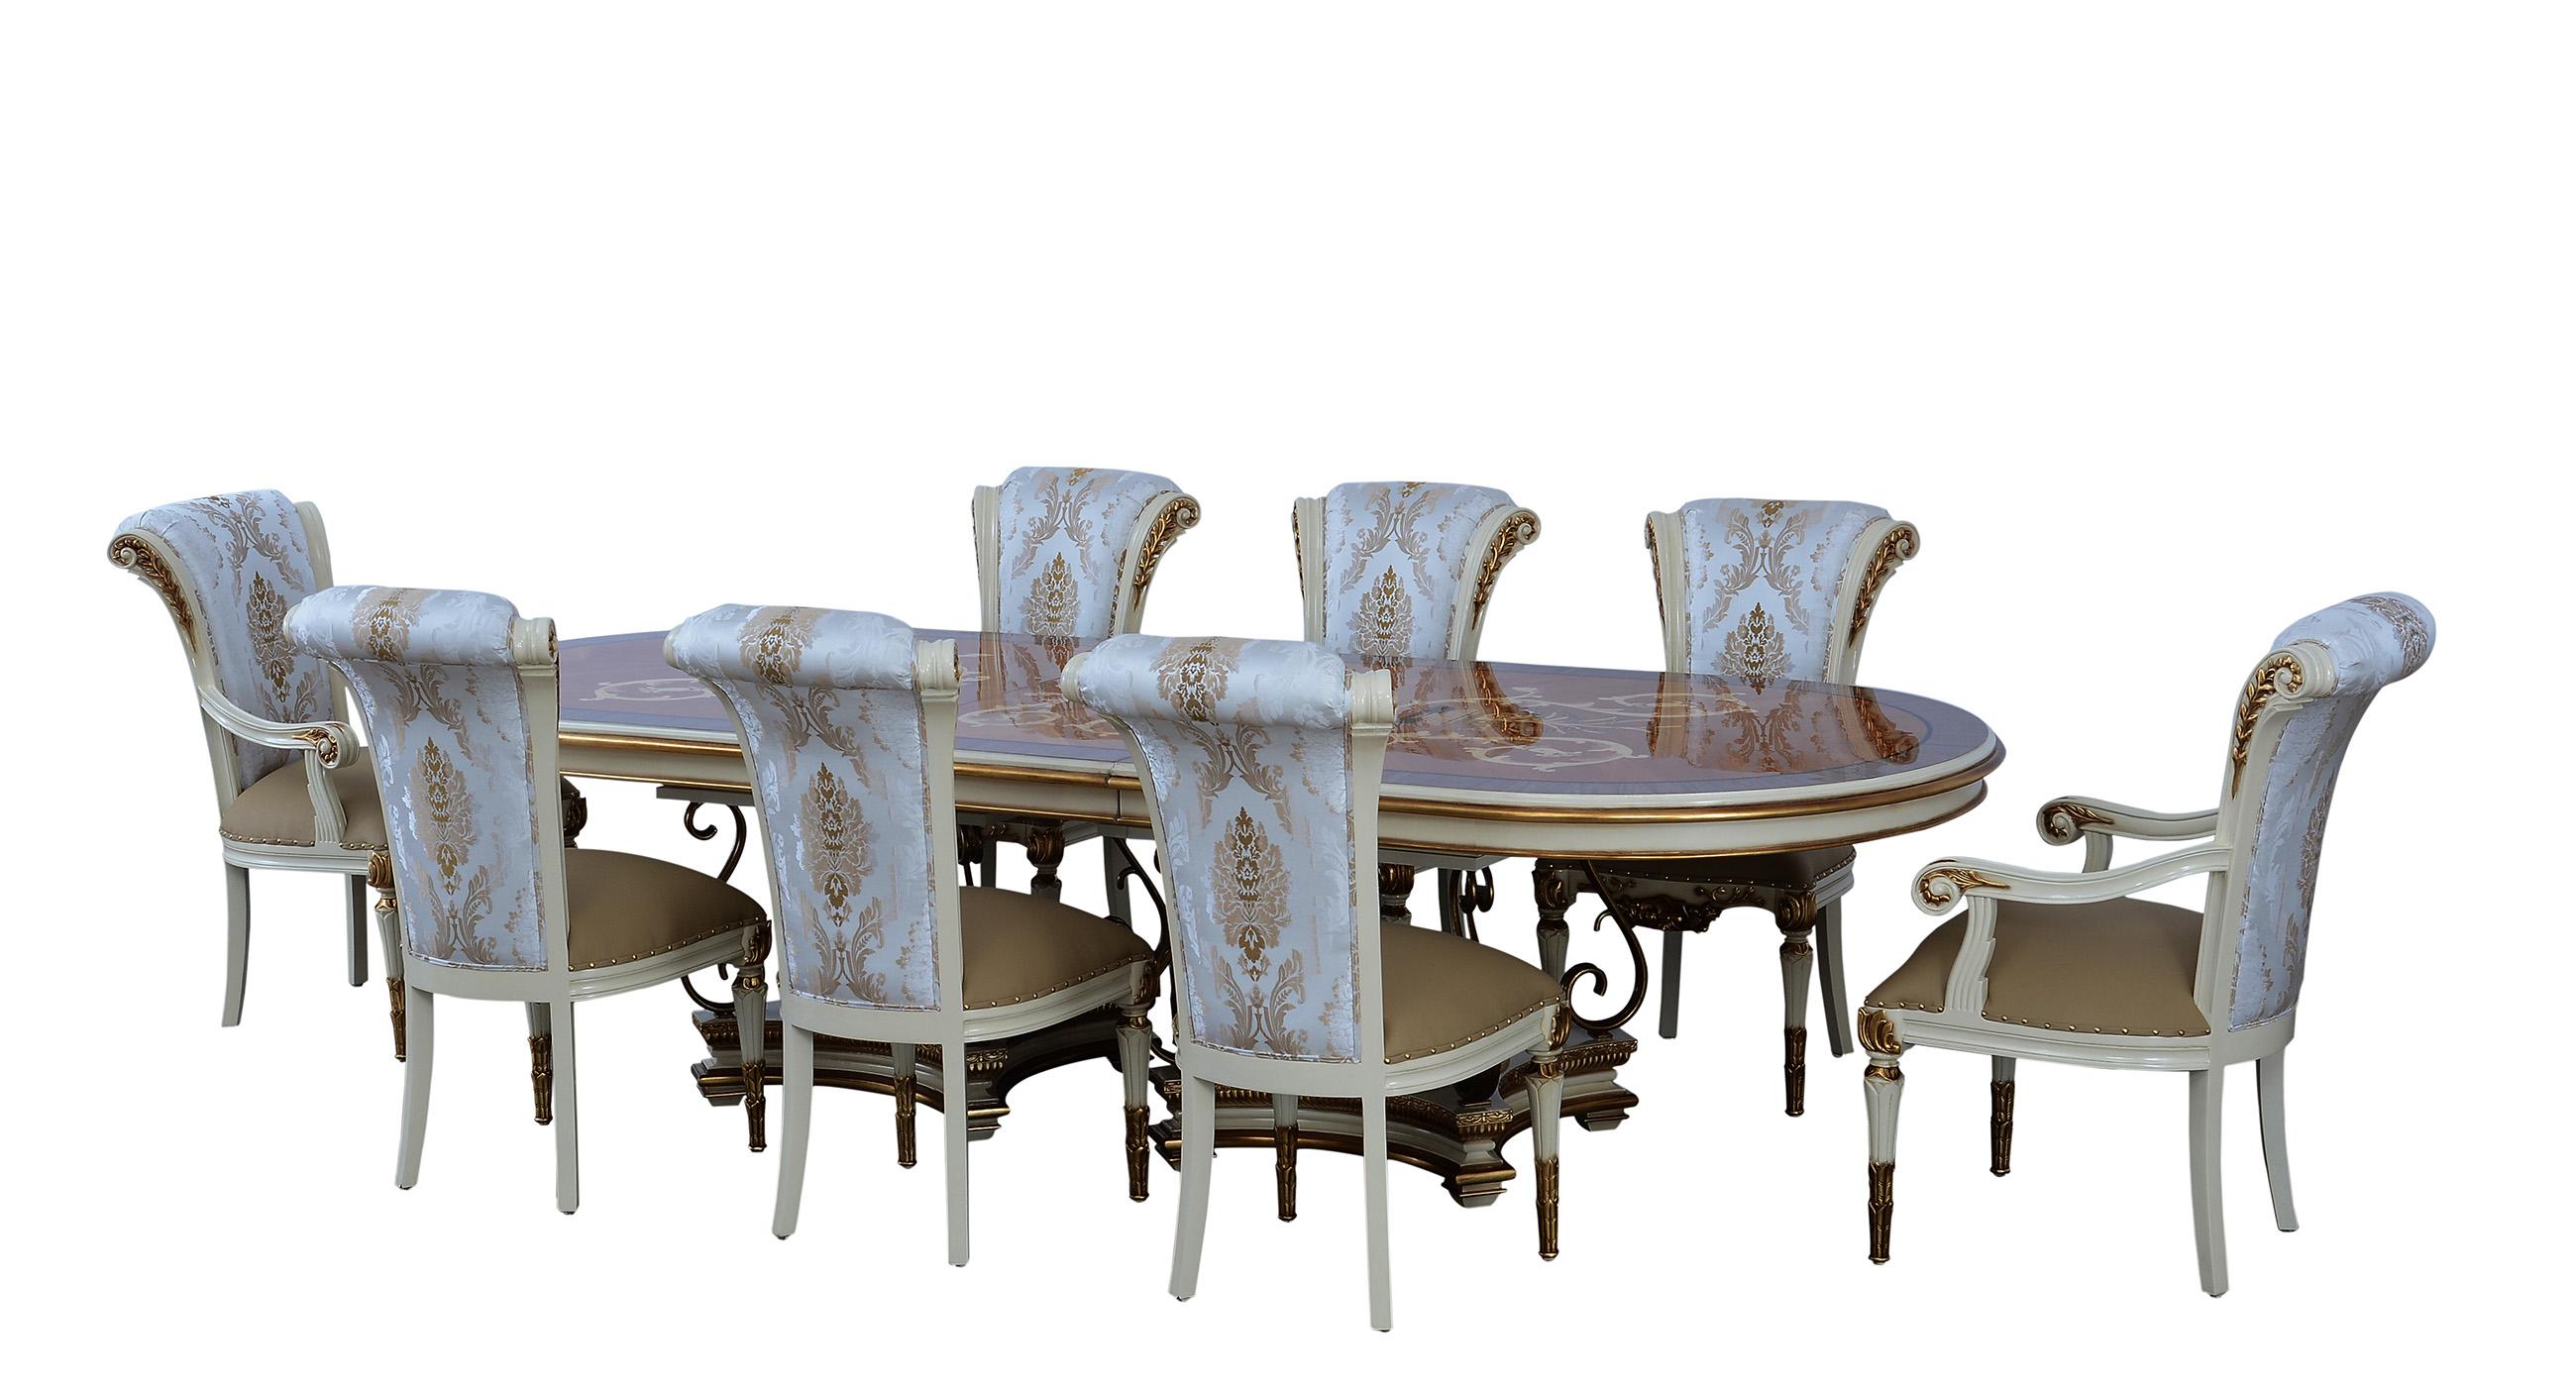 Classic, Traditional Oval Dining Table Set VALENTINA 51959-DT-9PC in Gold, Beige Leather